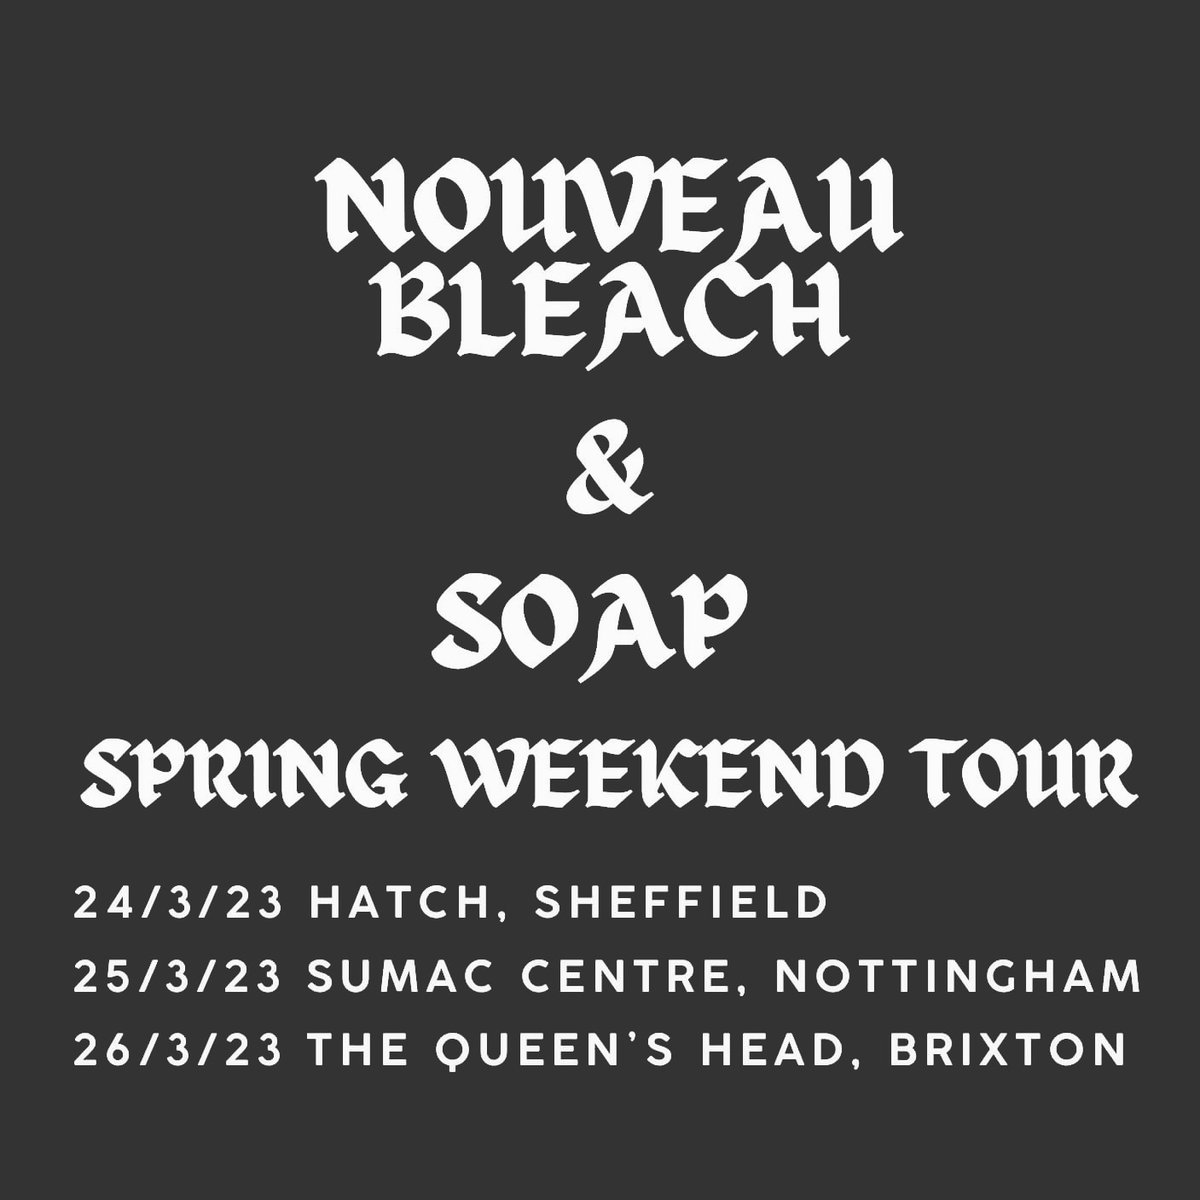 Our weekend of gigs kicks off tomorrow at @hatch_sheffield in #Sheffield alongside Blobb Ross & Captain Fitzroy

Then Saturday we head to #Nottingham for @P4THofficial Spring alldayer at the @SumacCentre 

 Sunday we've got a matinee show @QueensHeadbrix w/ @Rites_of_Hadda